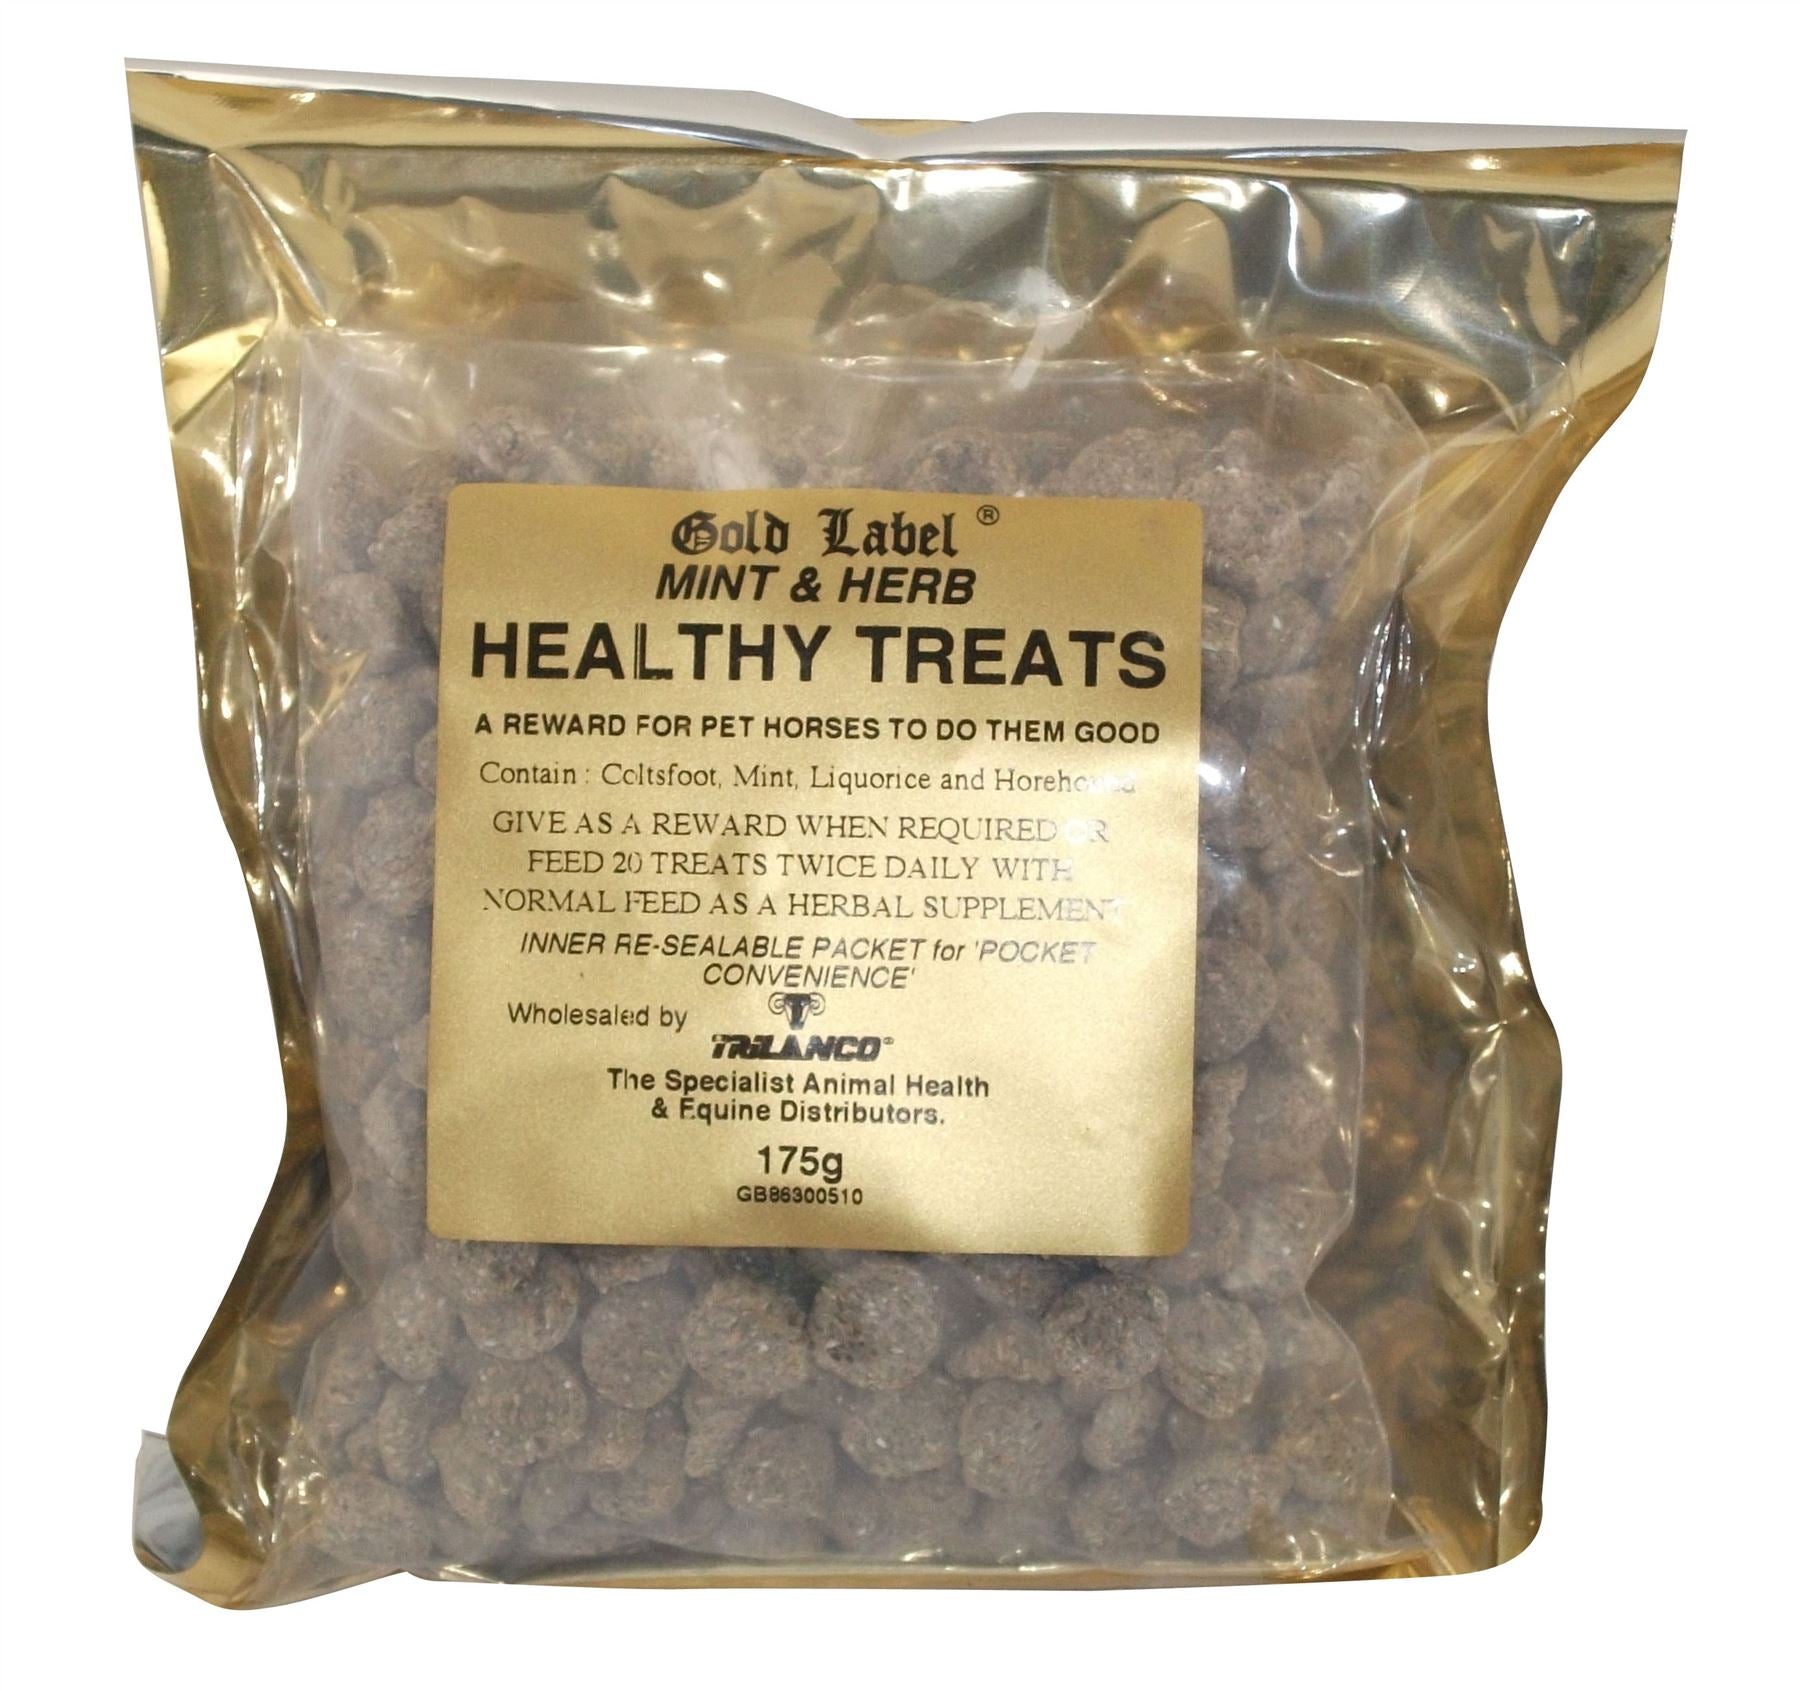 Gold Label Herbal Healthy Treats Mint/Herb - Just Horse Riders